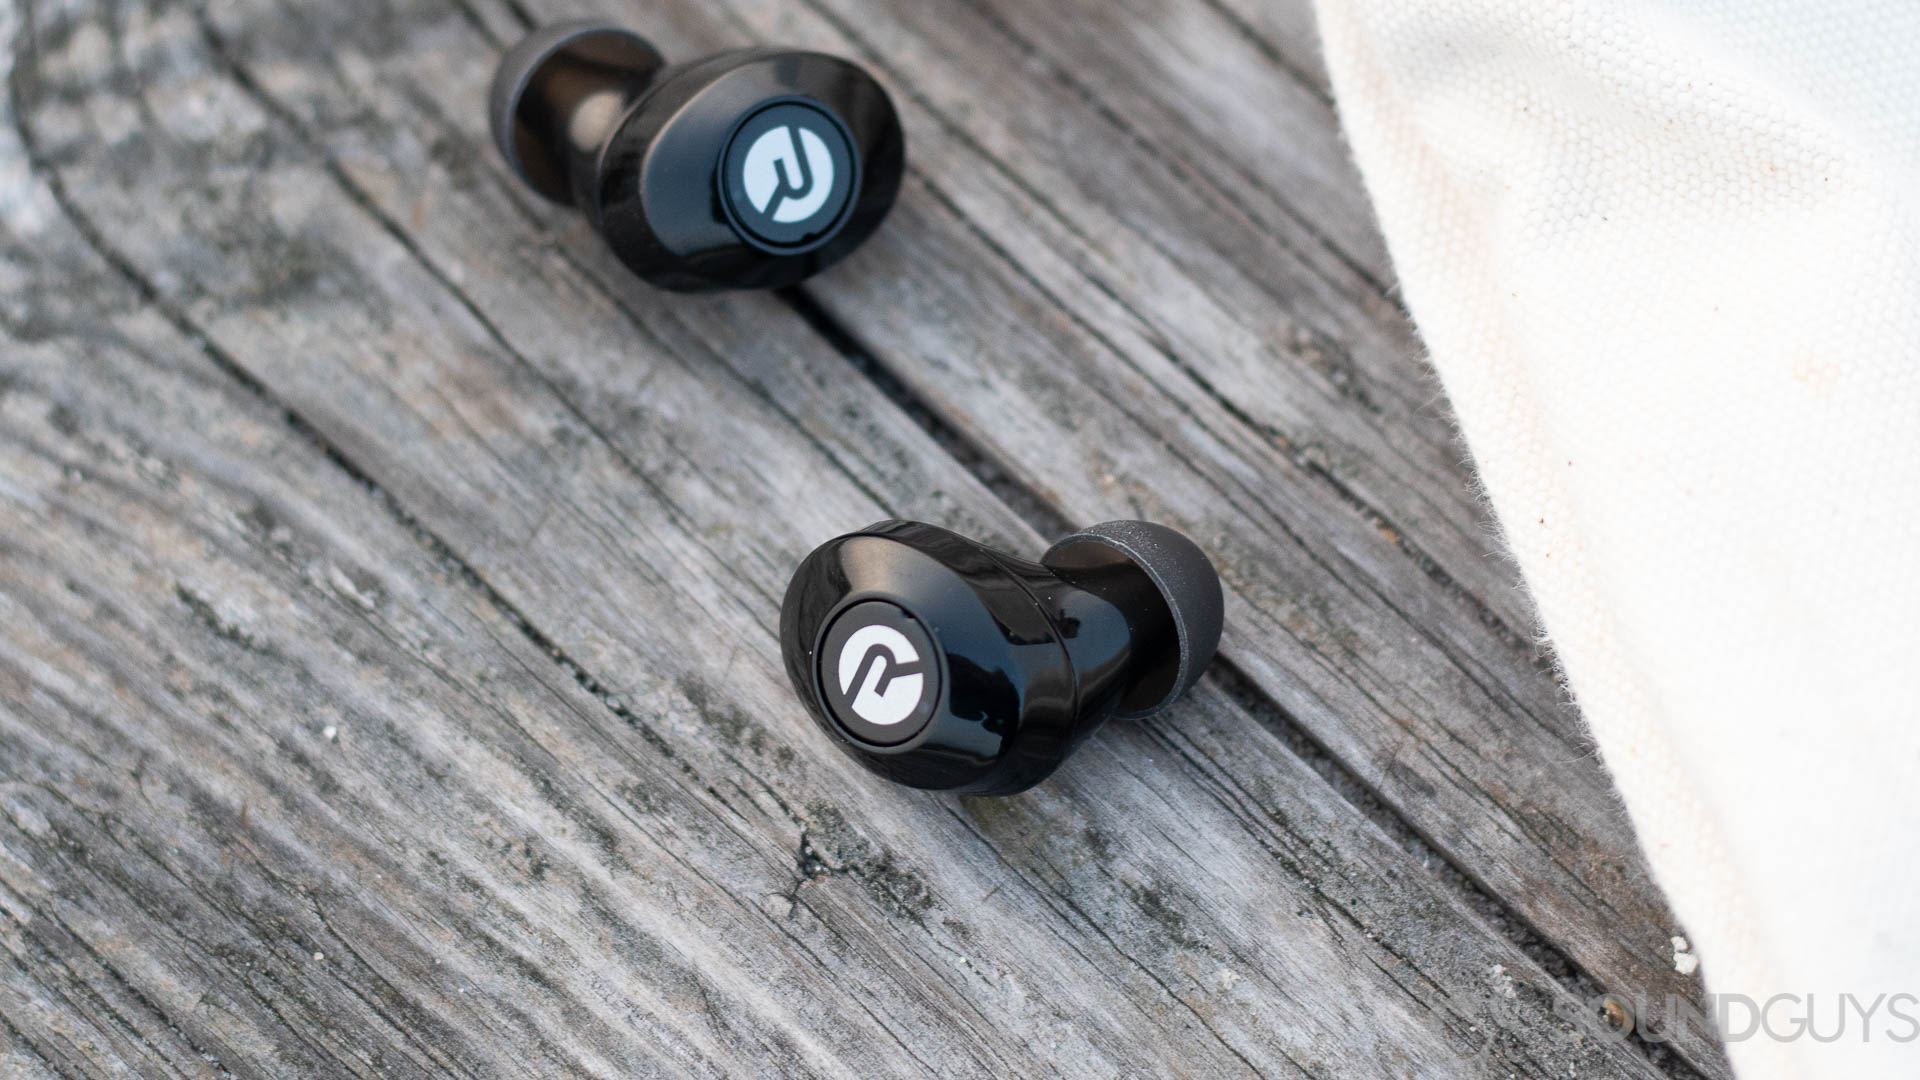 The Raycon E25 earbuds on a wood surface.